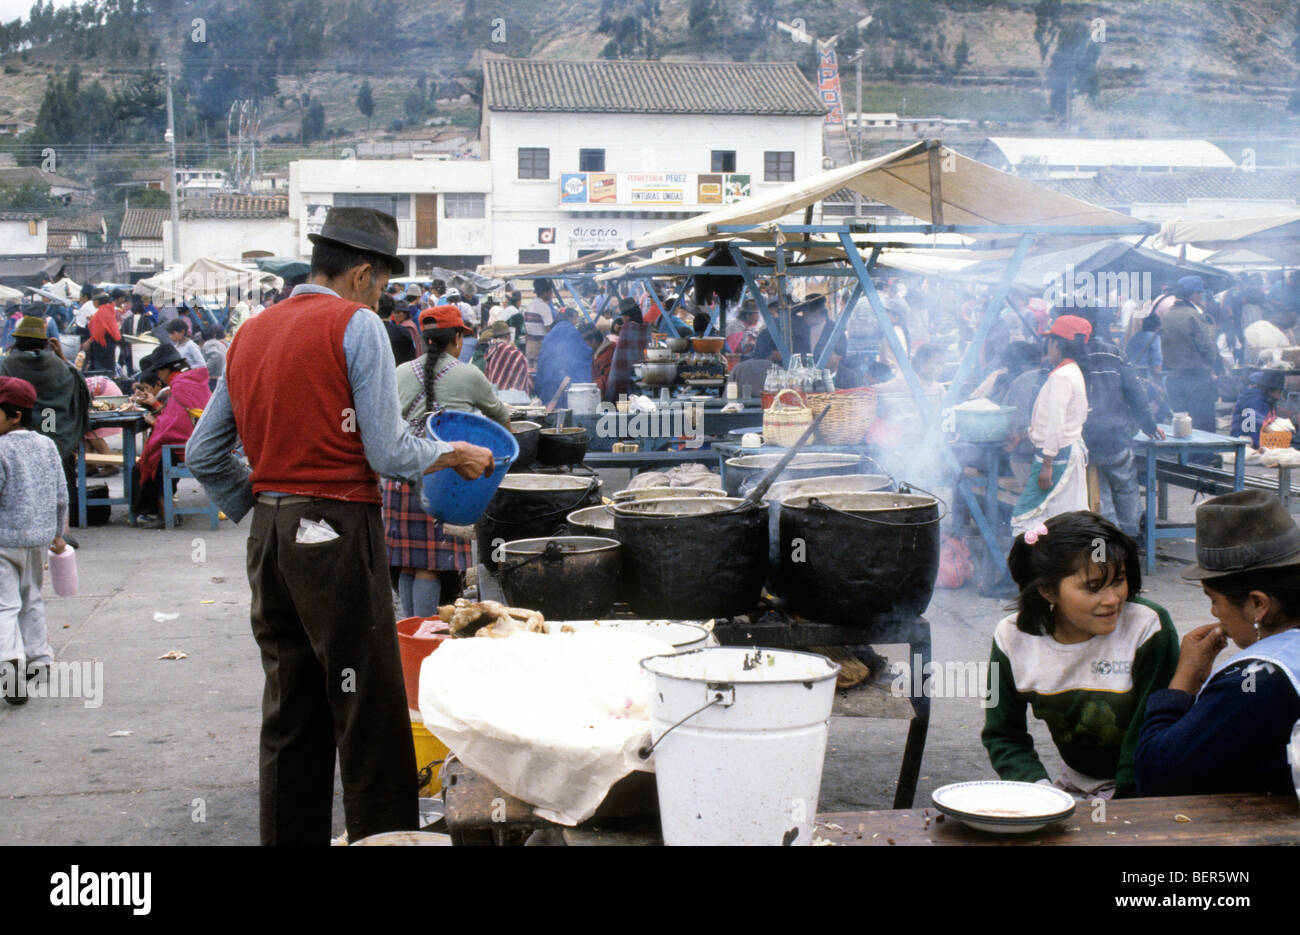 Male stall owner hold up plastic bucket and surveys line of deep metal cauldron like pots on cooked food stall.  Ecuador market Stock Photo